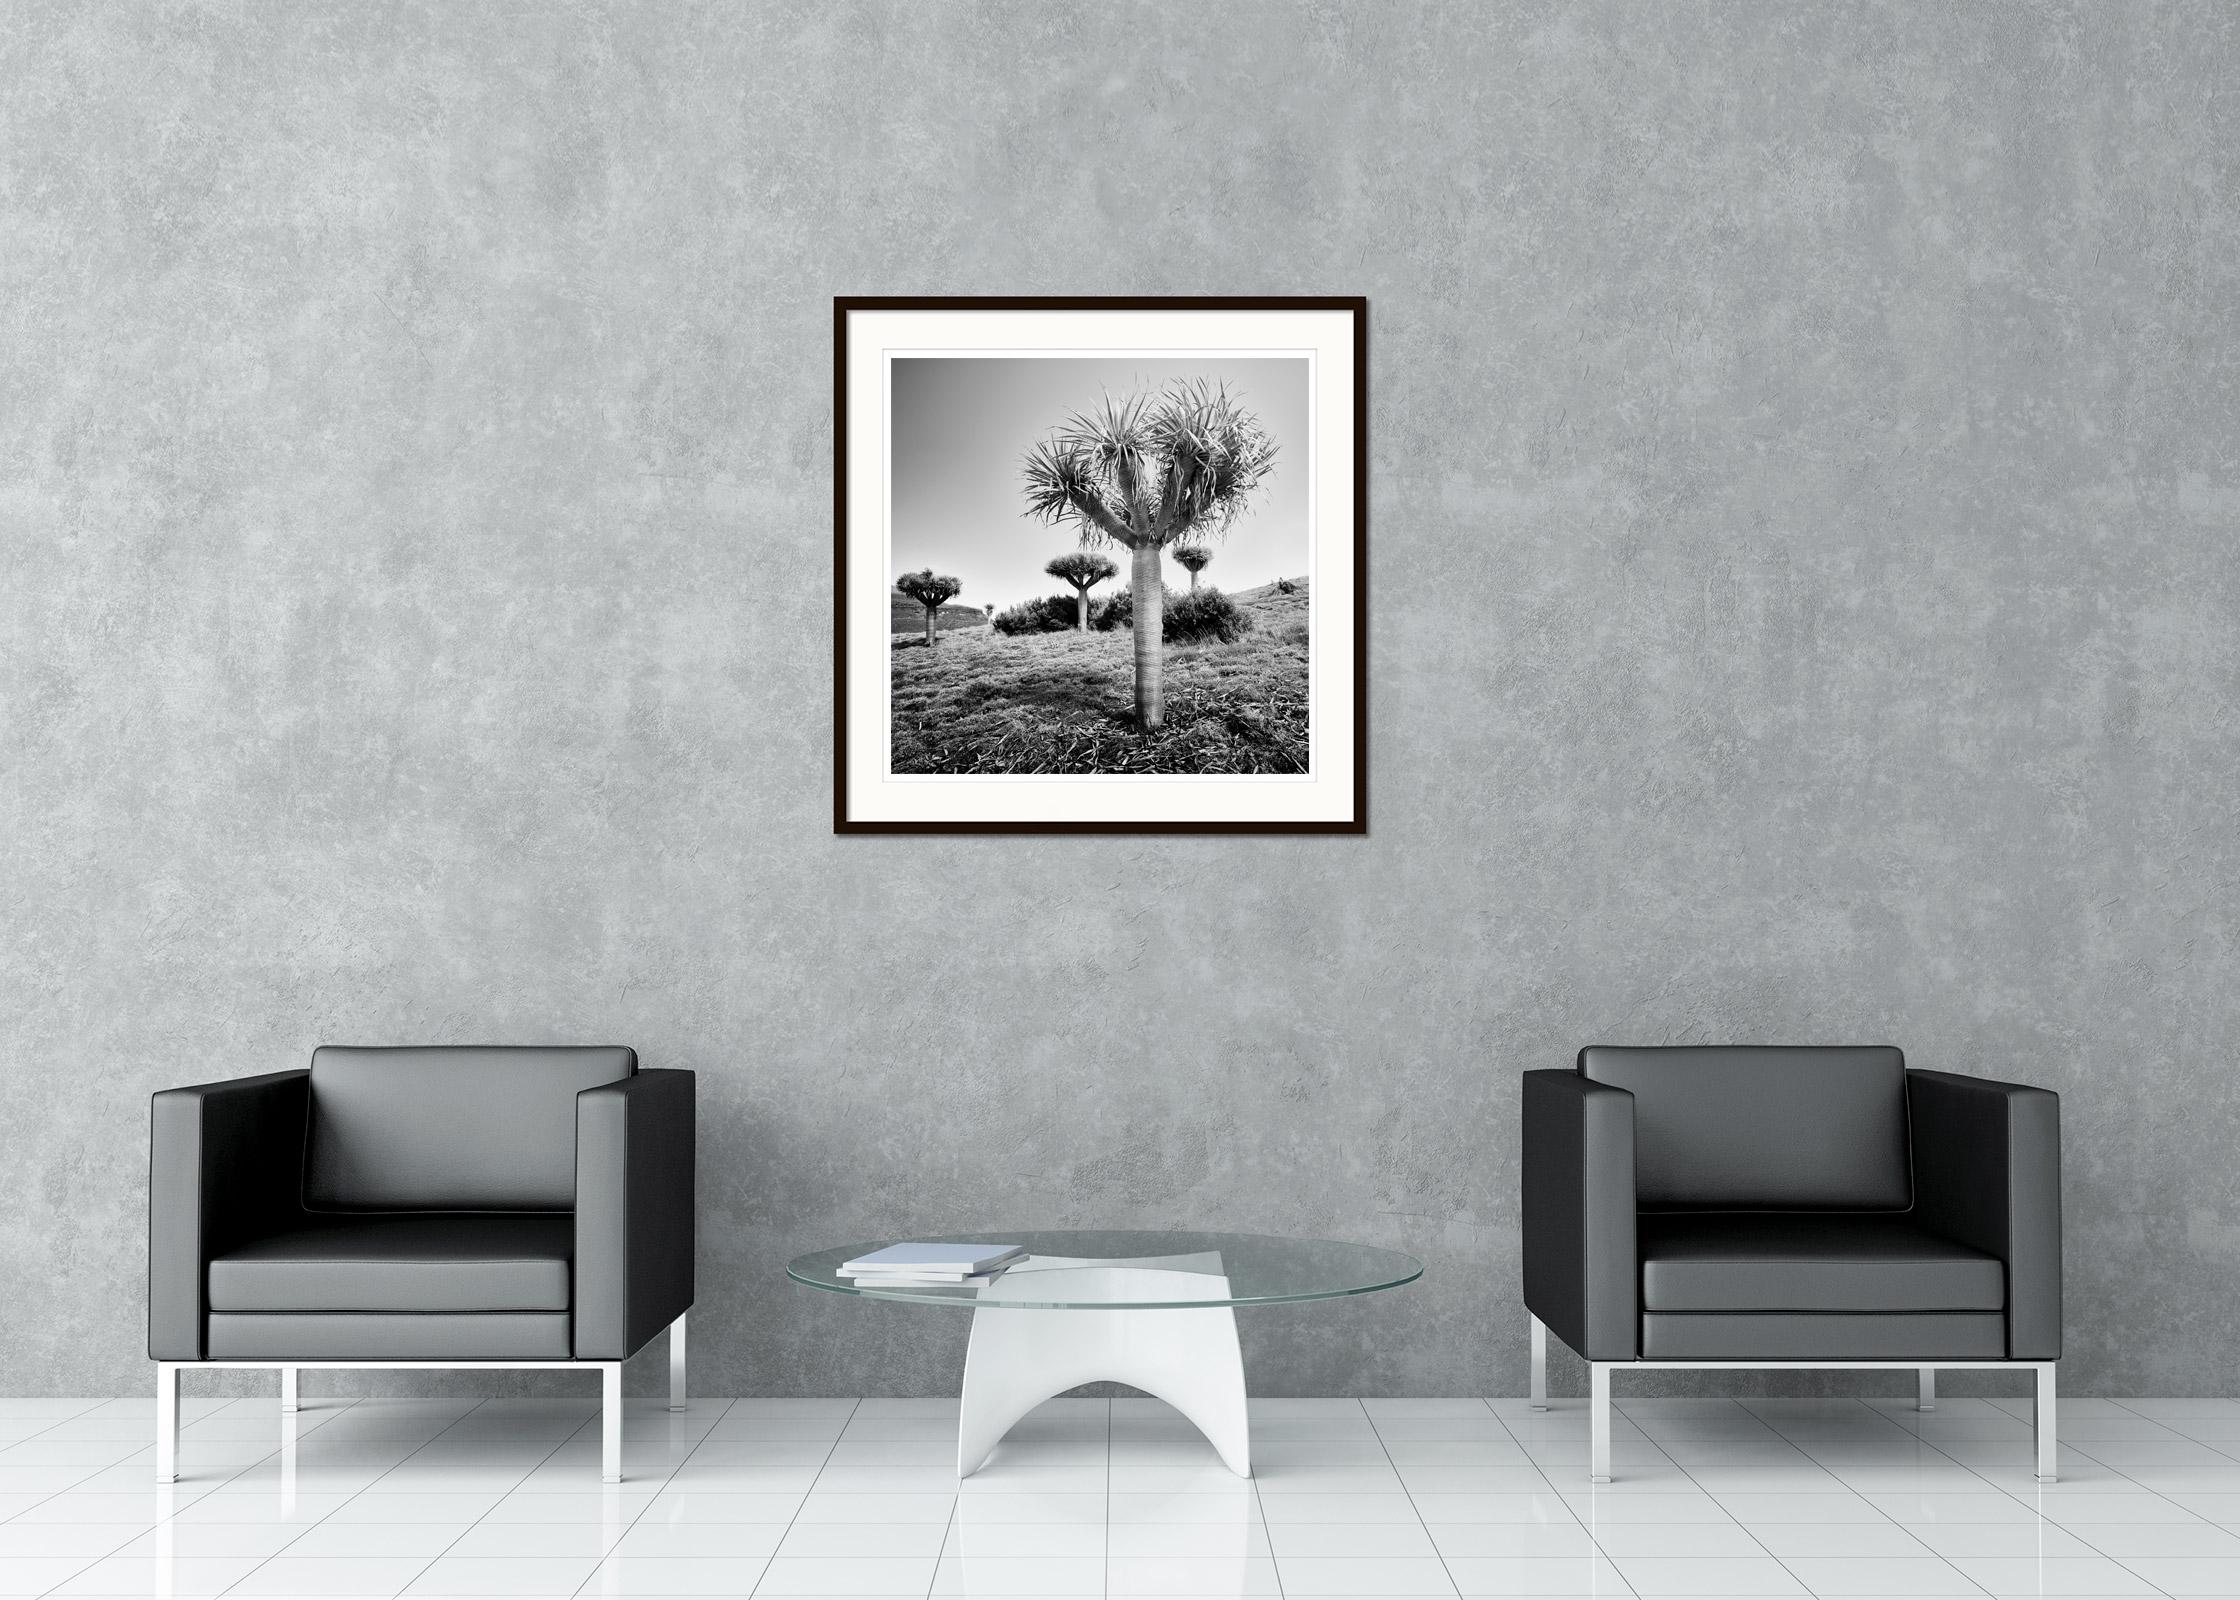 Canary Islands Dragon Tree, Madeira, black white fine art Landscape photography For Sale 1